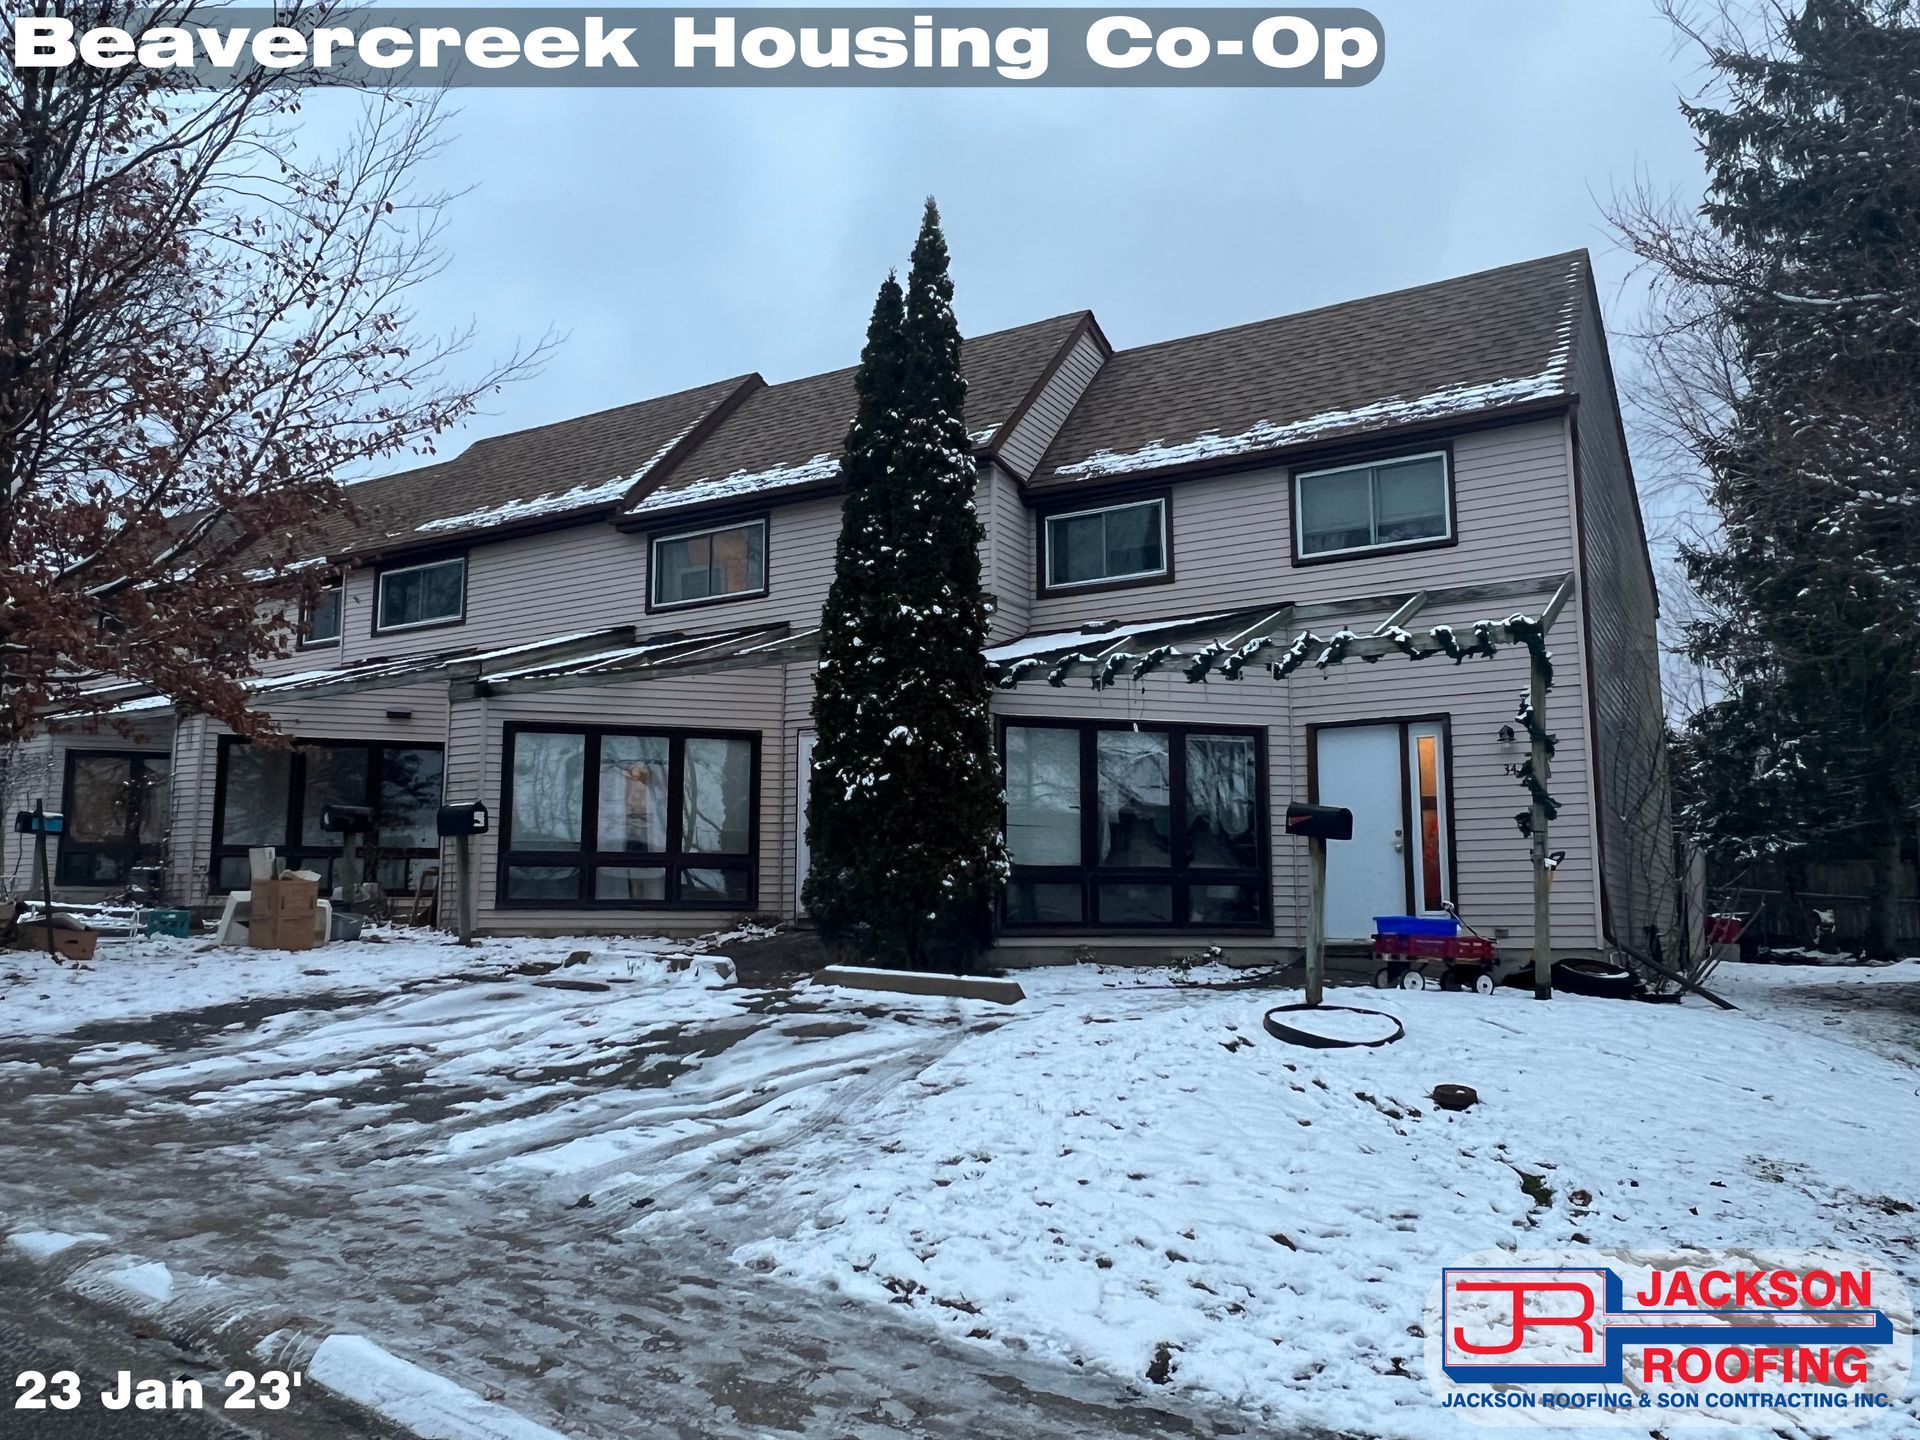 A picture of a beavercreek housing co-op on january 23